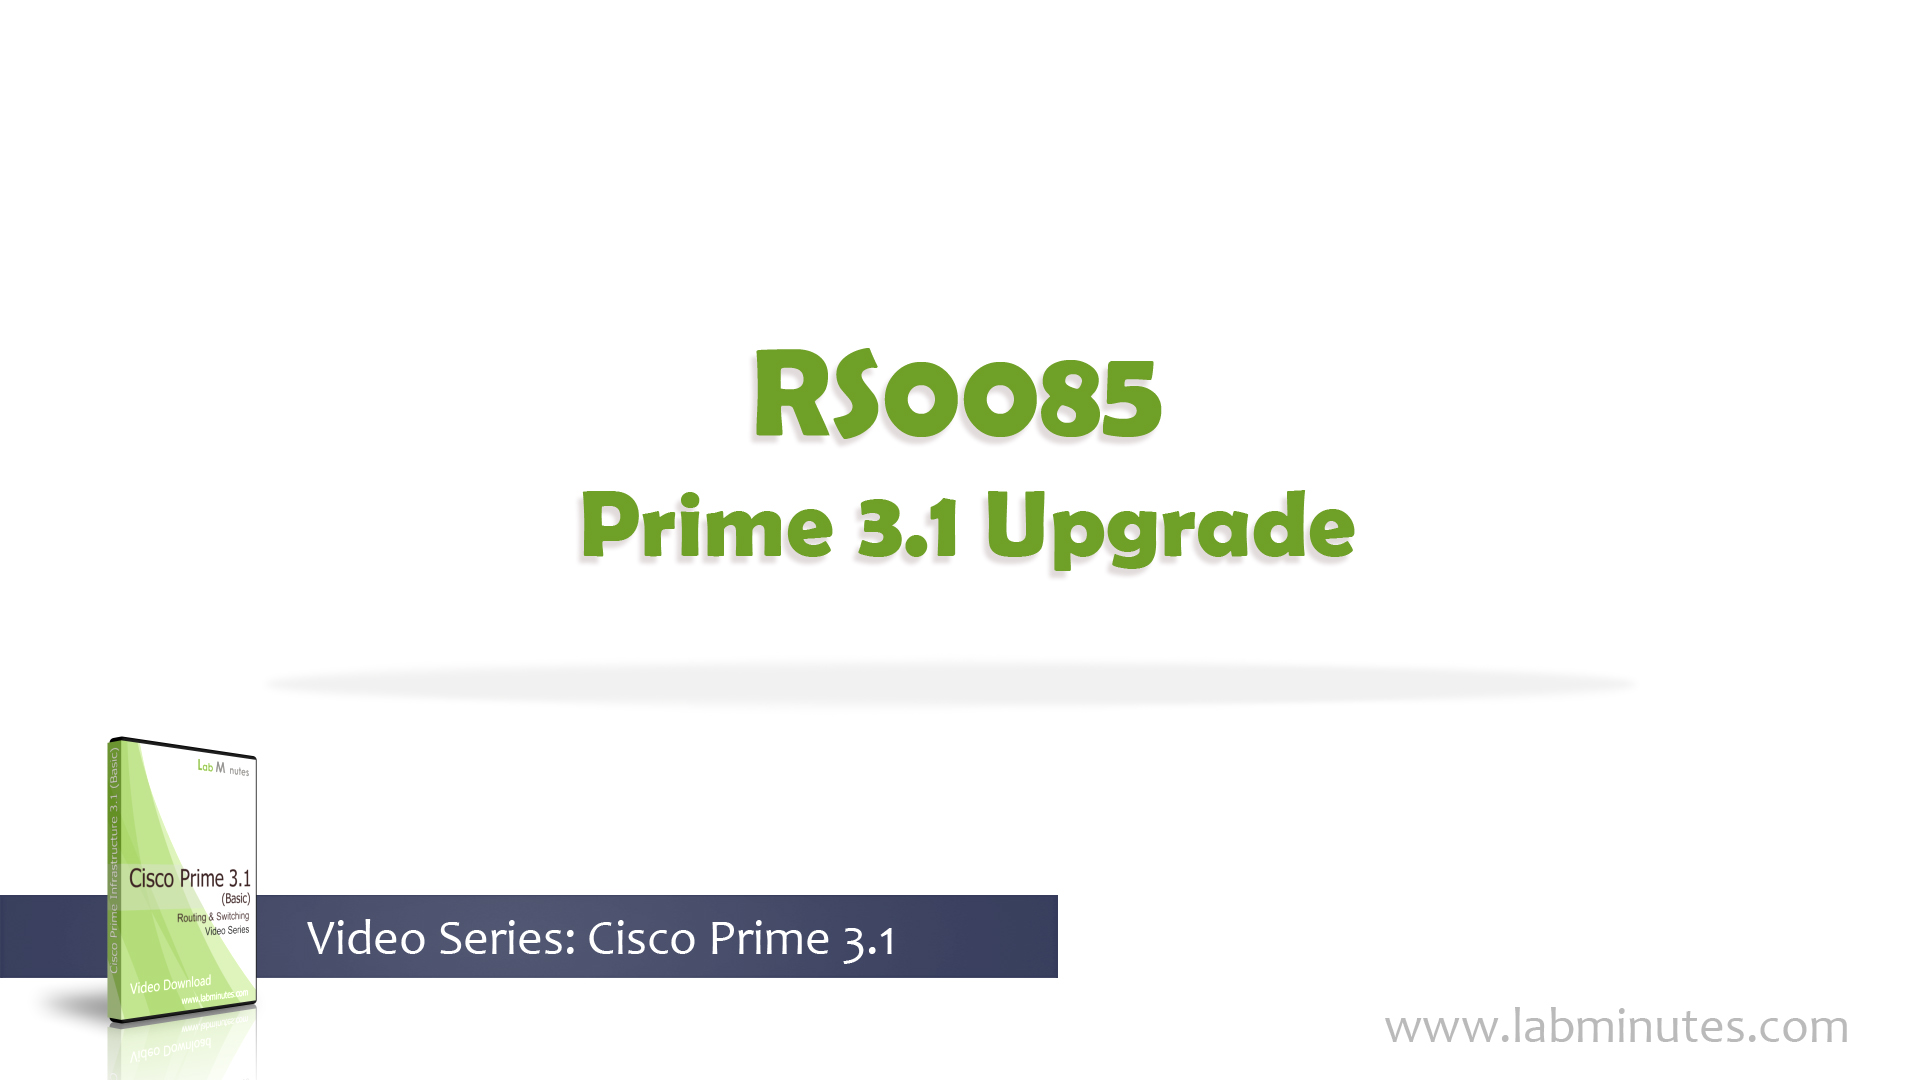 How to Upgrade to Prime 3.1